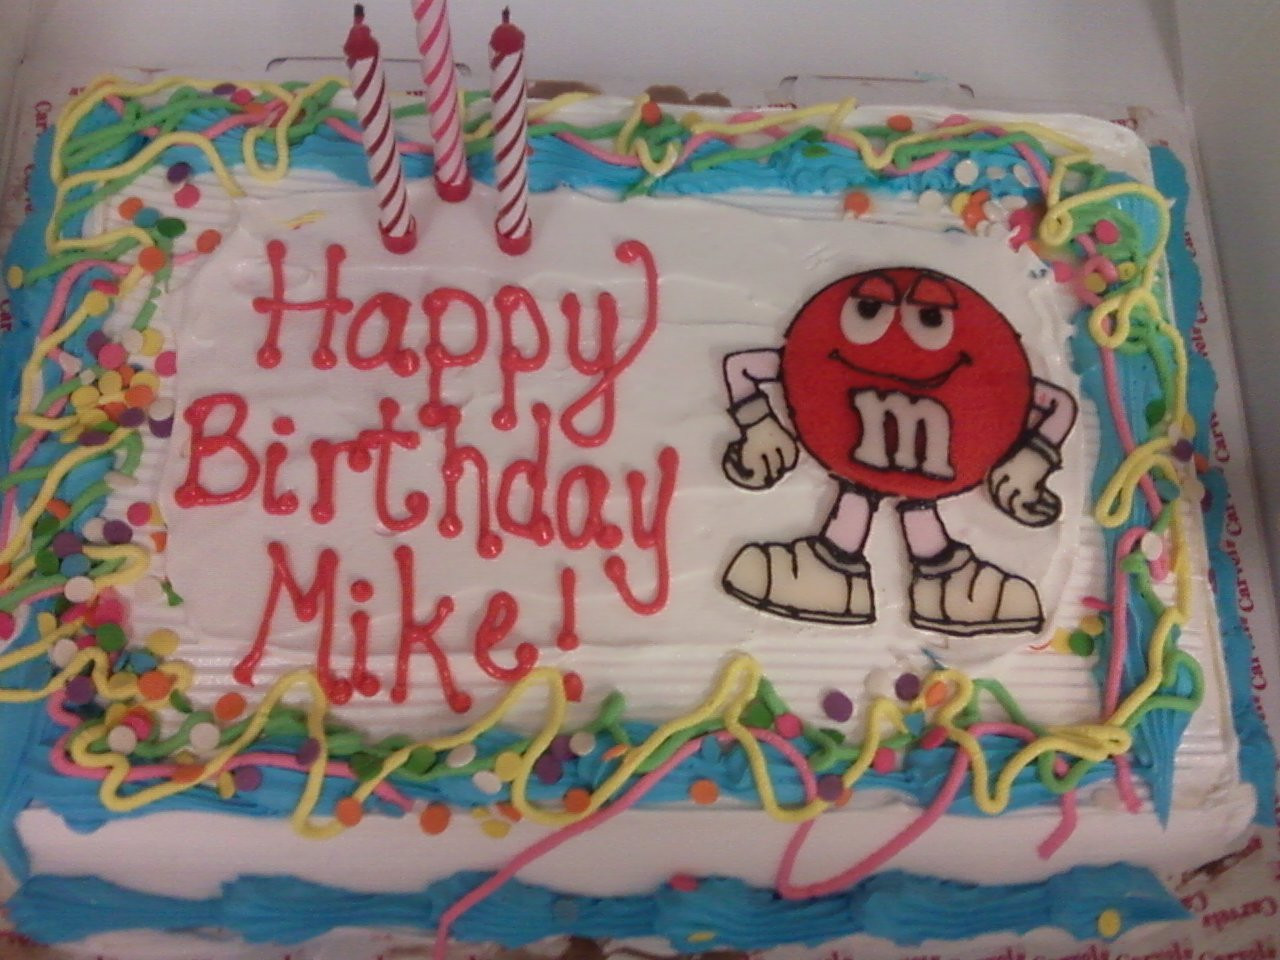 Best ideas about Happy Birthday Mike Cake
. Save or Pin Mike’s Birthday Cake Now.